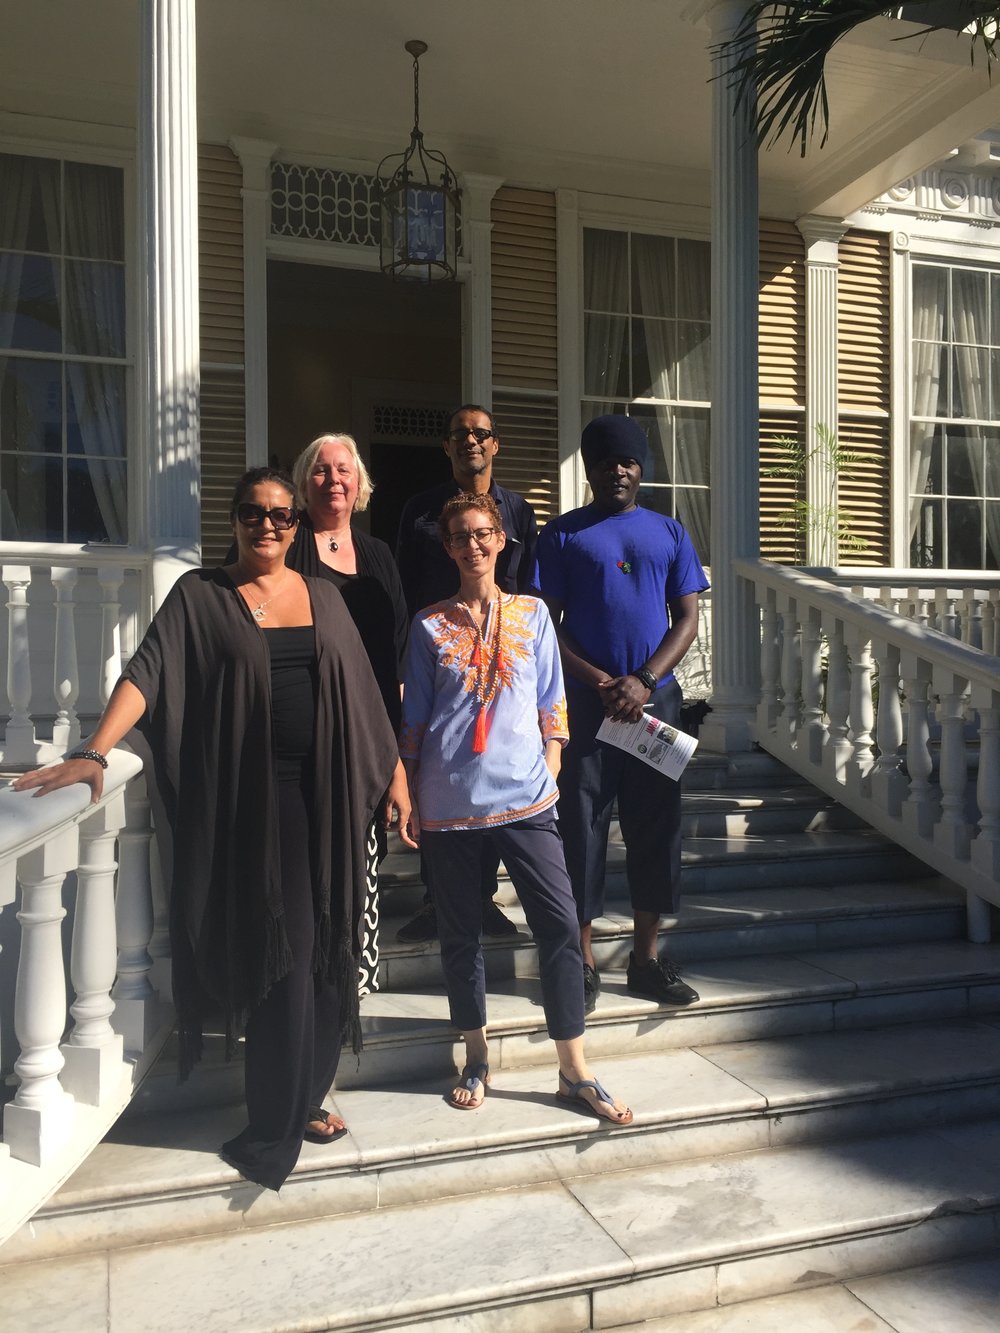 At Devon House, one of the locations for Jamaica Biennial 2017, with NGJ Director Veerle Poupeye (2nd left, back) and the 2017 selection committee, from left to right: Suzanne Fredericks, Amanda Coulson (bottom centre), Chris Cozier (to centre) and Omari Ra (far right)